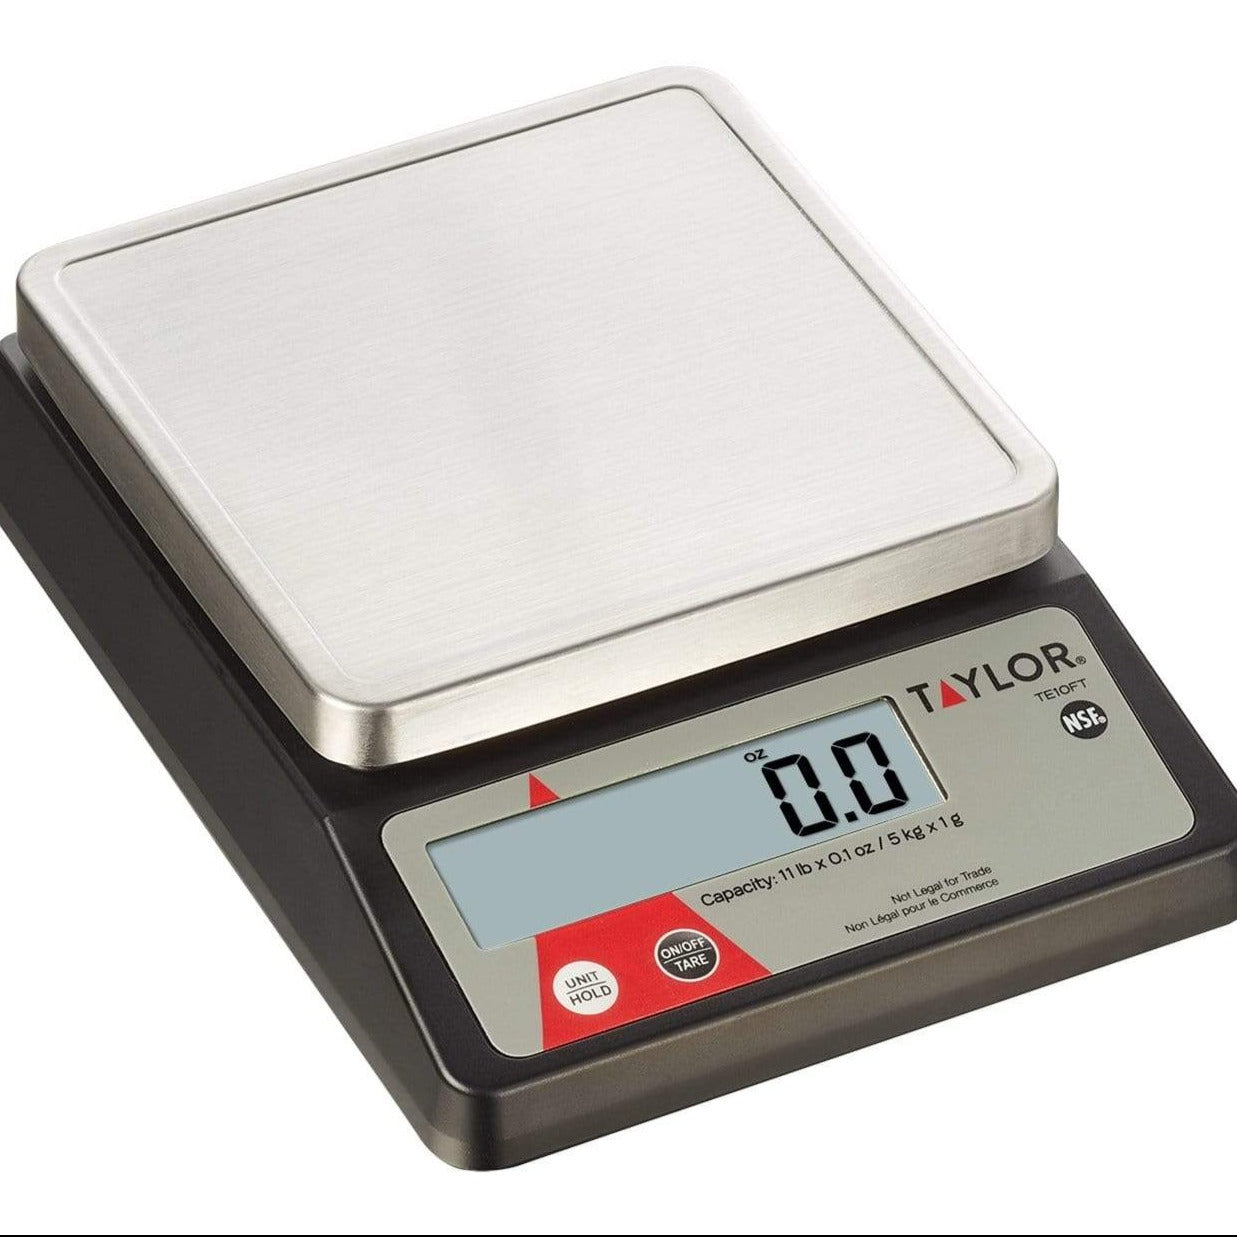 5 Core Food Scale Digital Kitchen Scale 11Lb/ 5KG for Baking